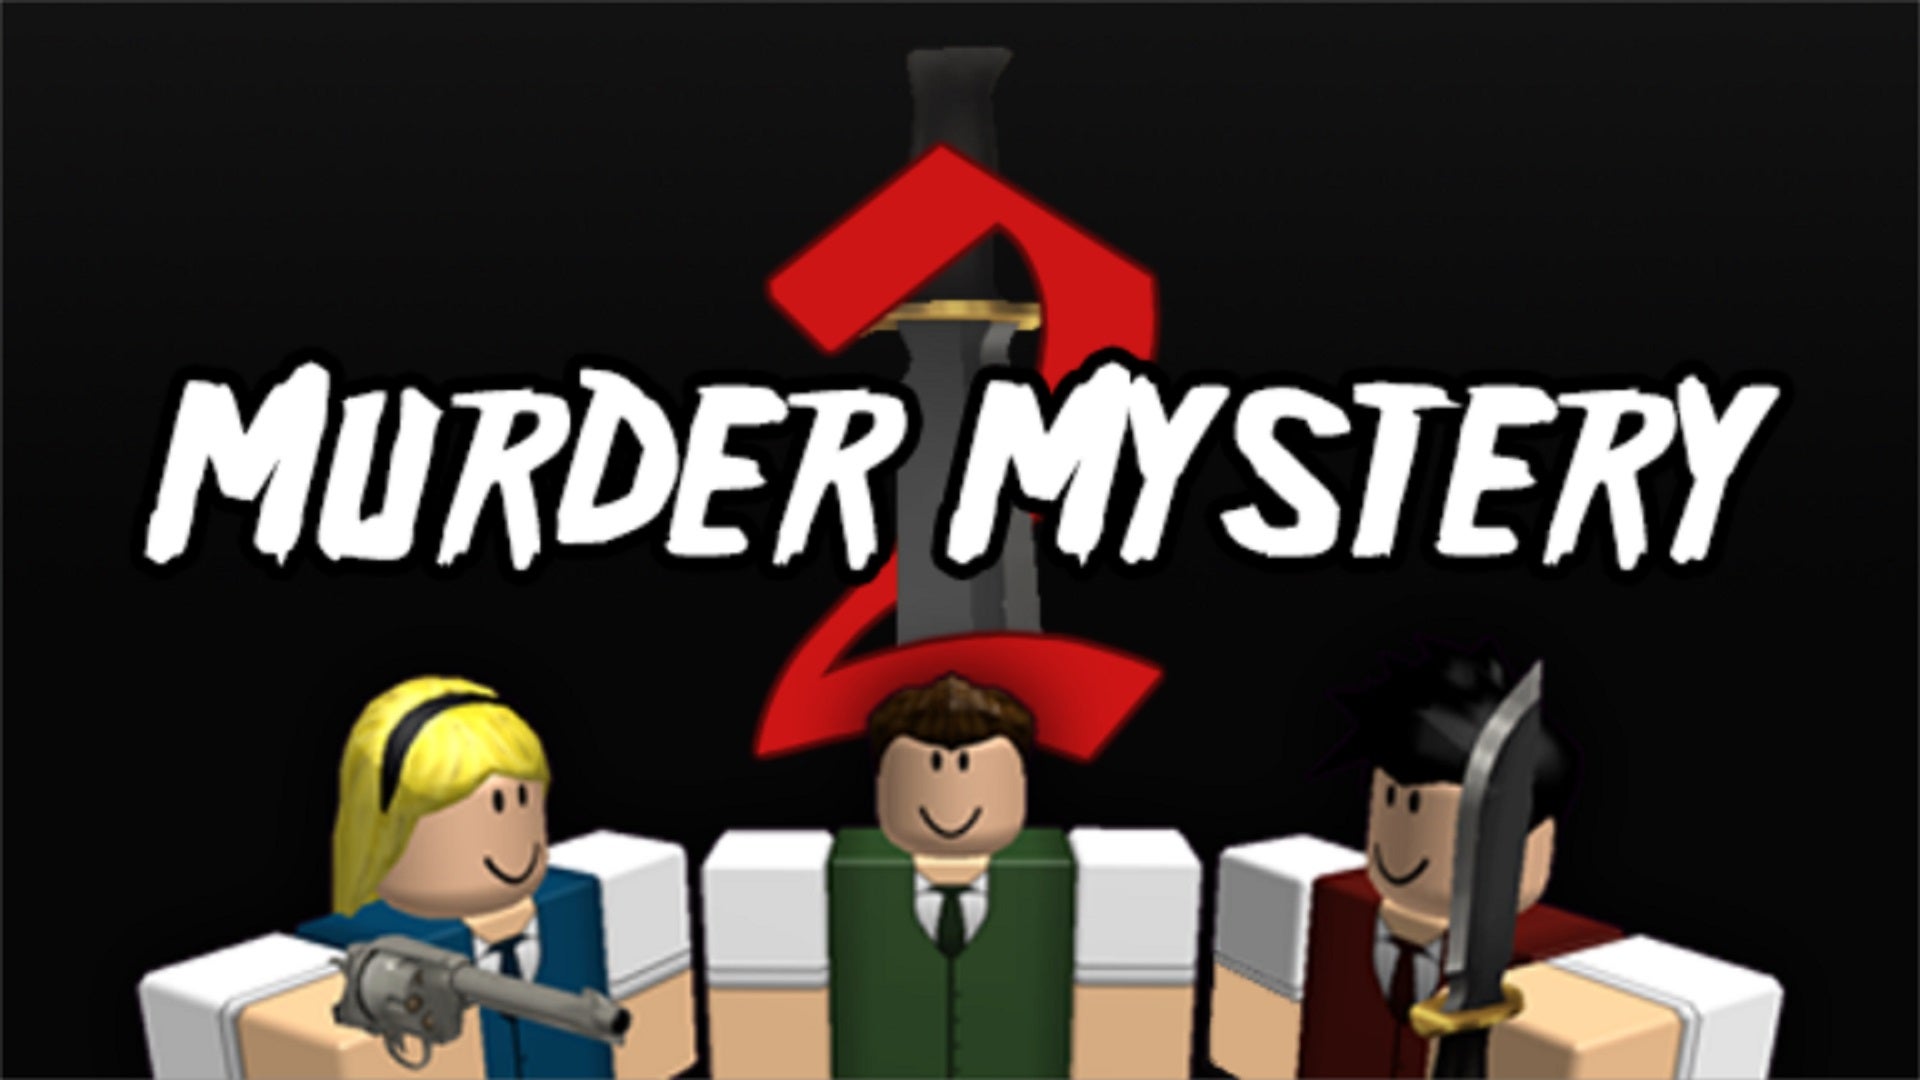 Three Roblox figures, two armed with a gun and a knife. A stylised sword in the background intertwines with text reading "Murder Mystery 2".